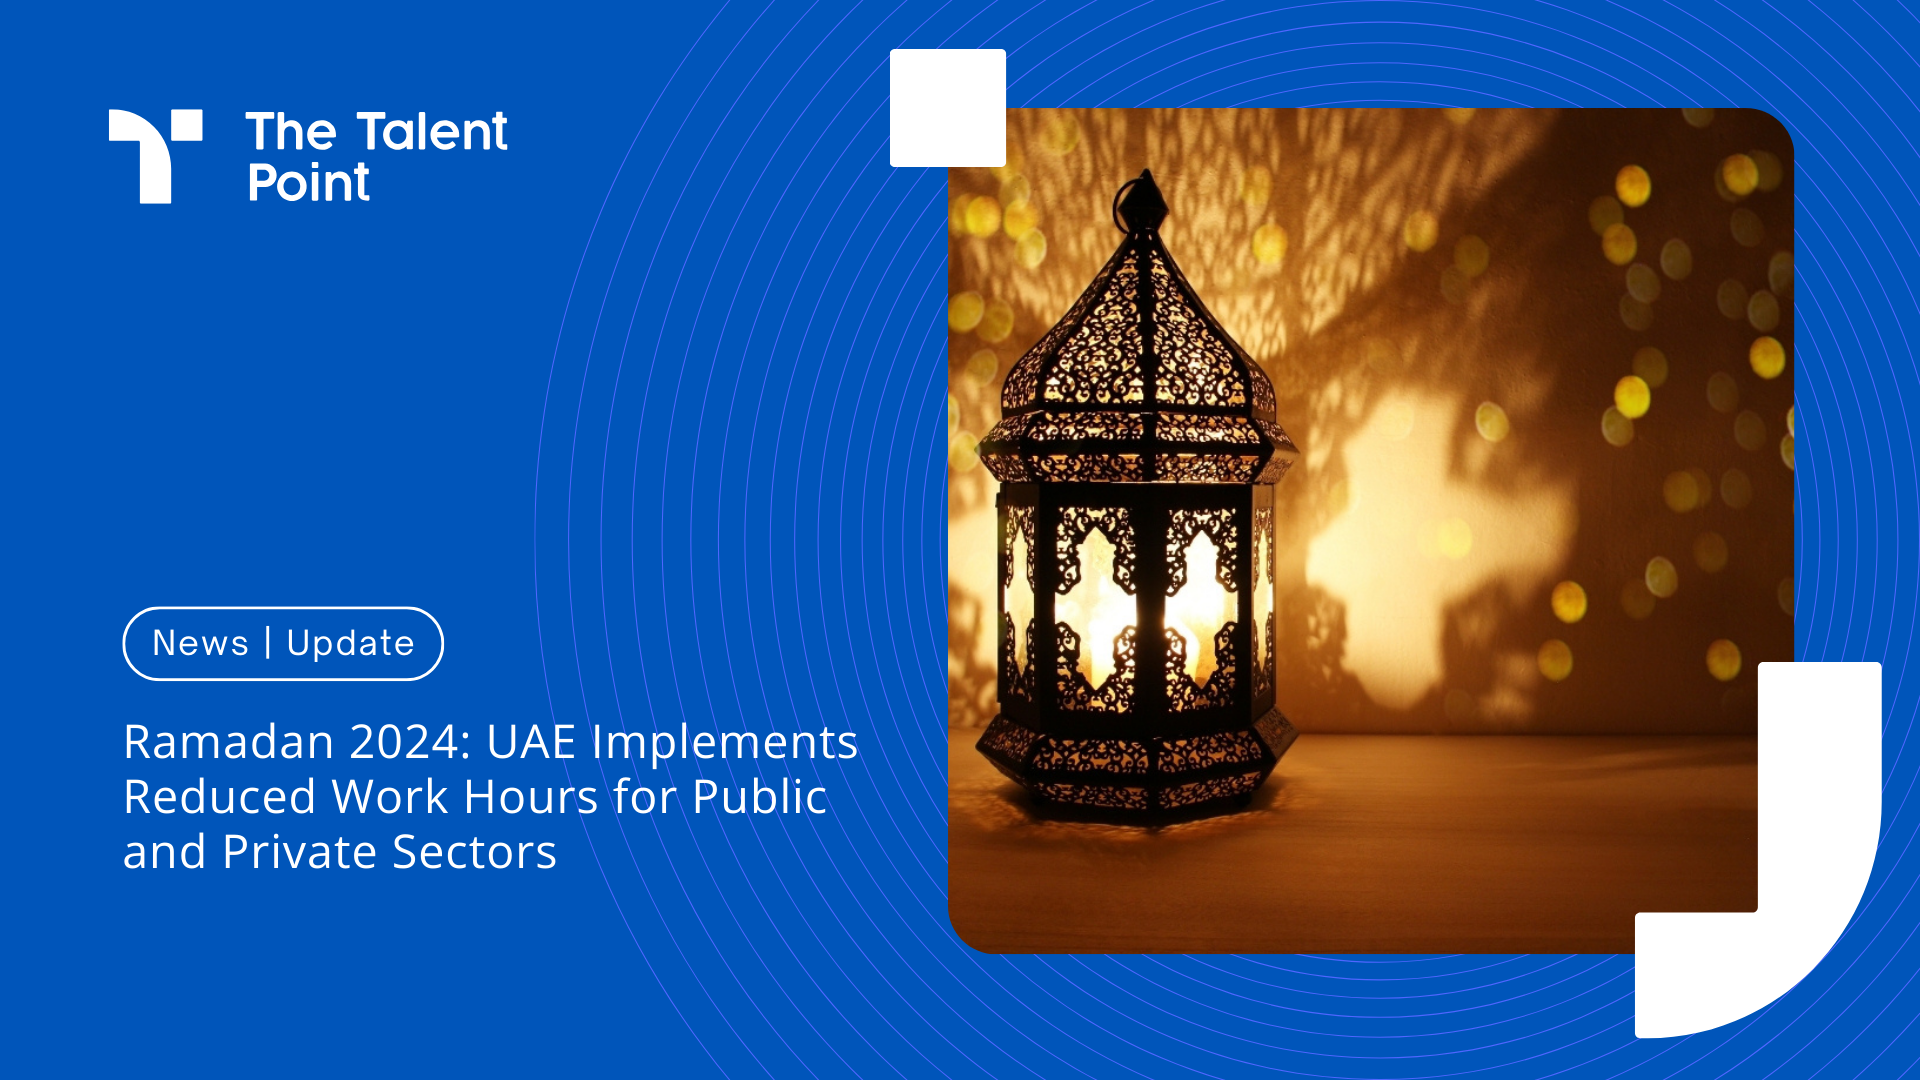 Ramadan 2024: UAE Implements Reduced Work Hours for Public and Private Sectors